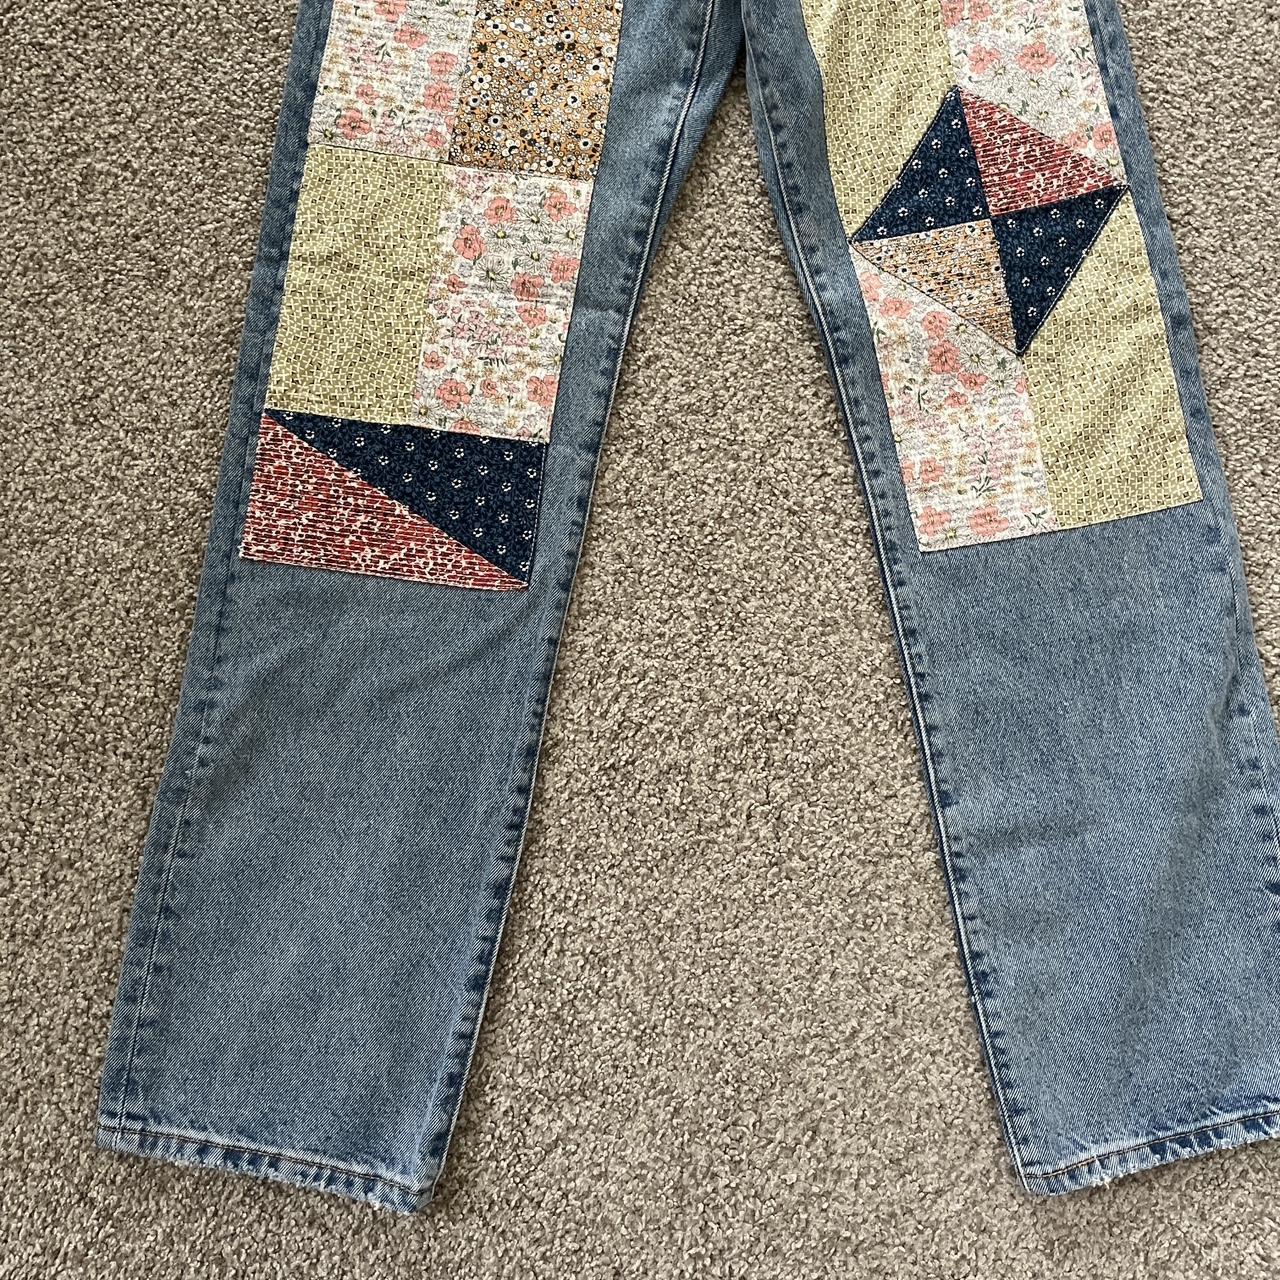 Levi’s 501 patchwork jeans. Size 25W, 32L. These are... - Depop